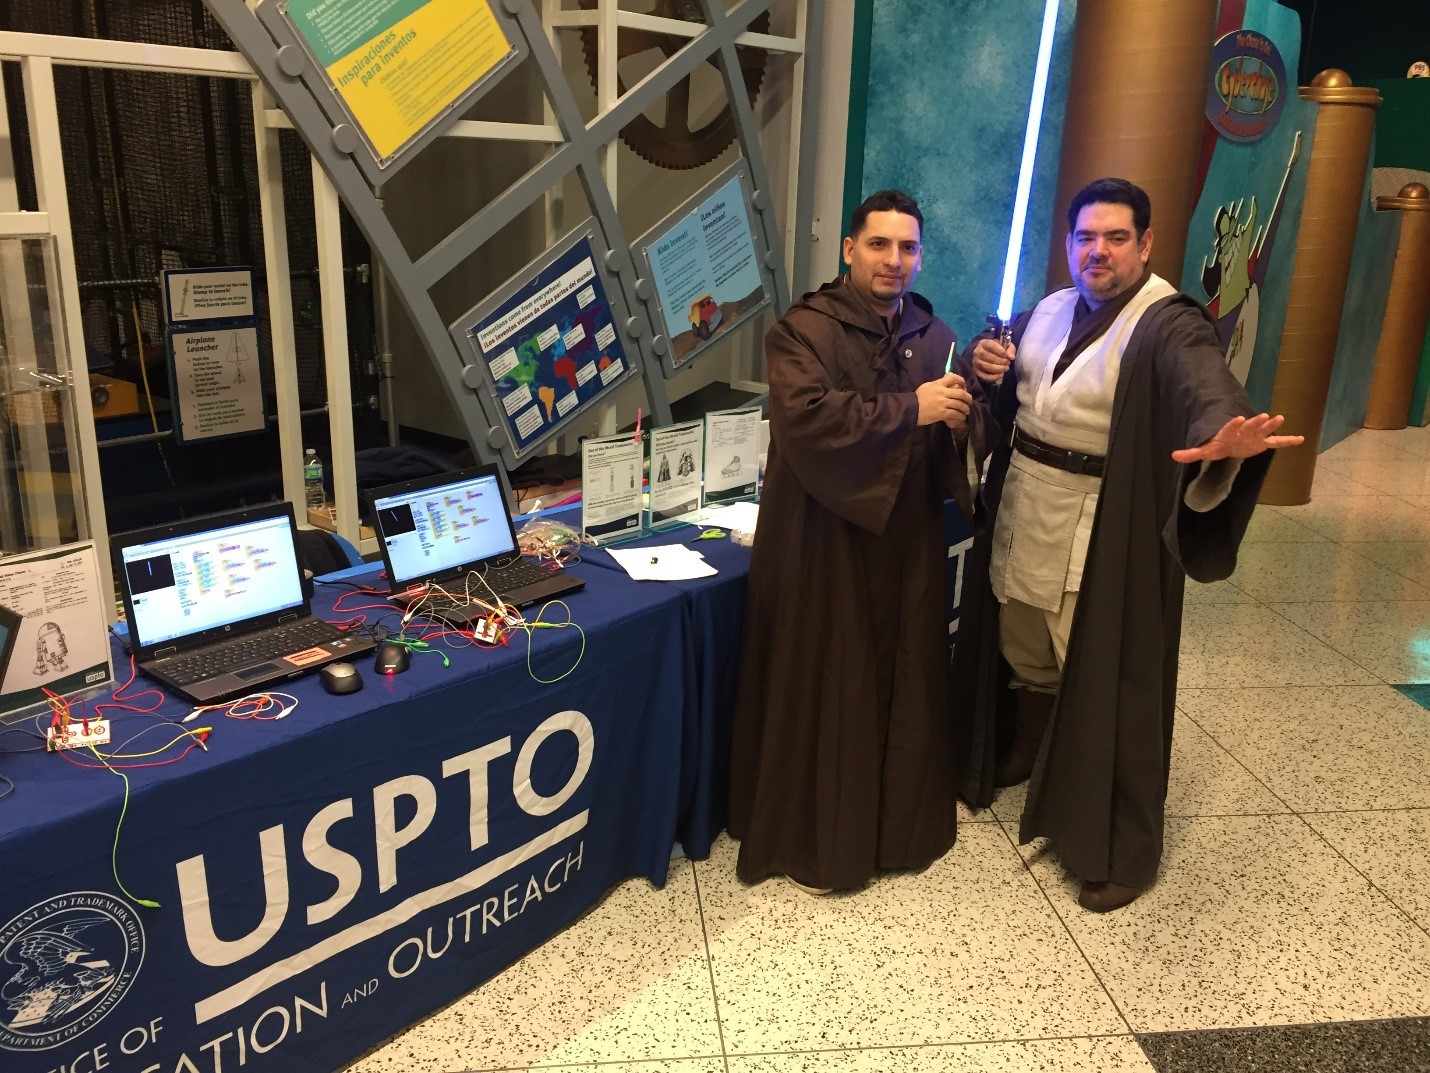 U.S. Patent and Trademark Office (USPTO) Education and Outreach team members pulled out all the stops to show students the real technology behind Star Wars at the December 10 ¡Descubra! Meet the Science Expert event with the Smithsonian Latino Center, interacting with approximately 4000 museum visitors that day.